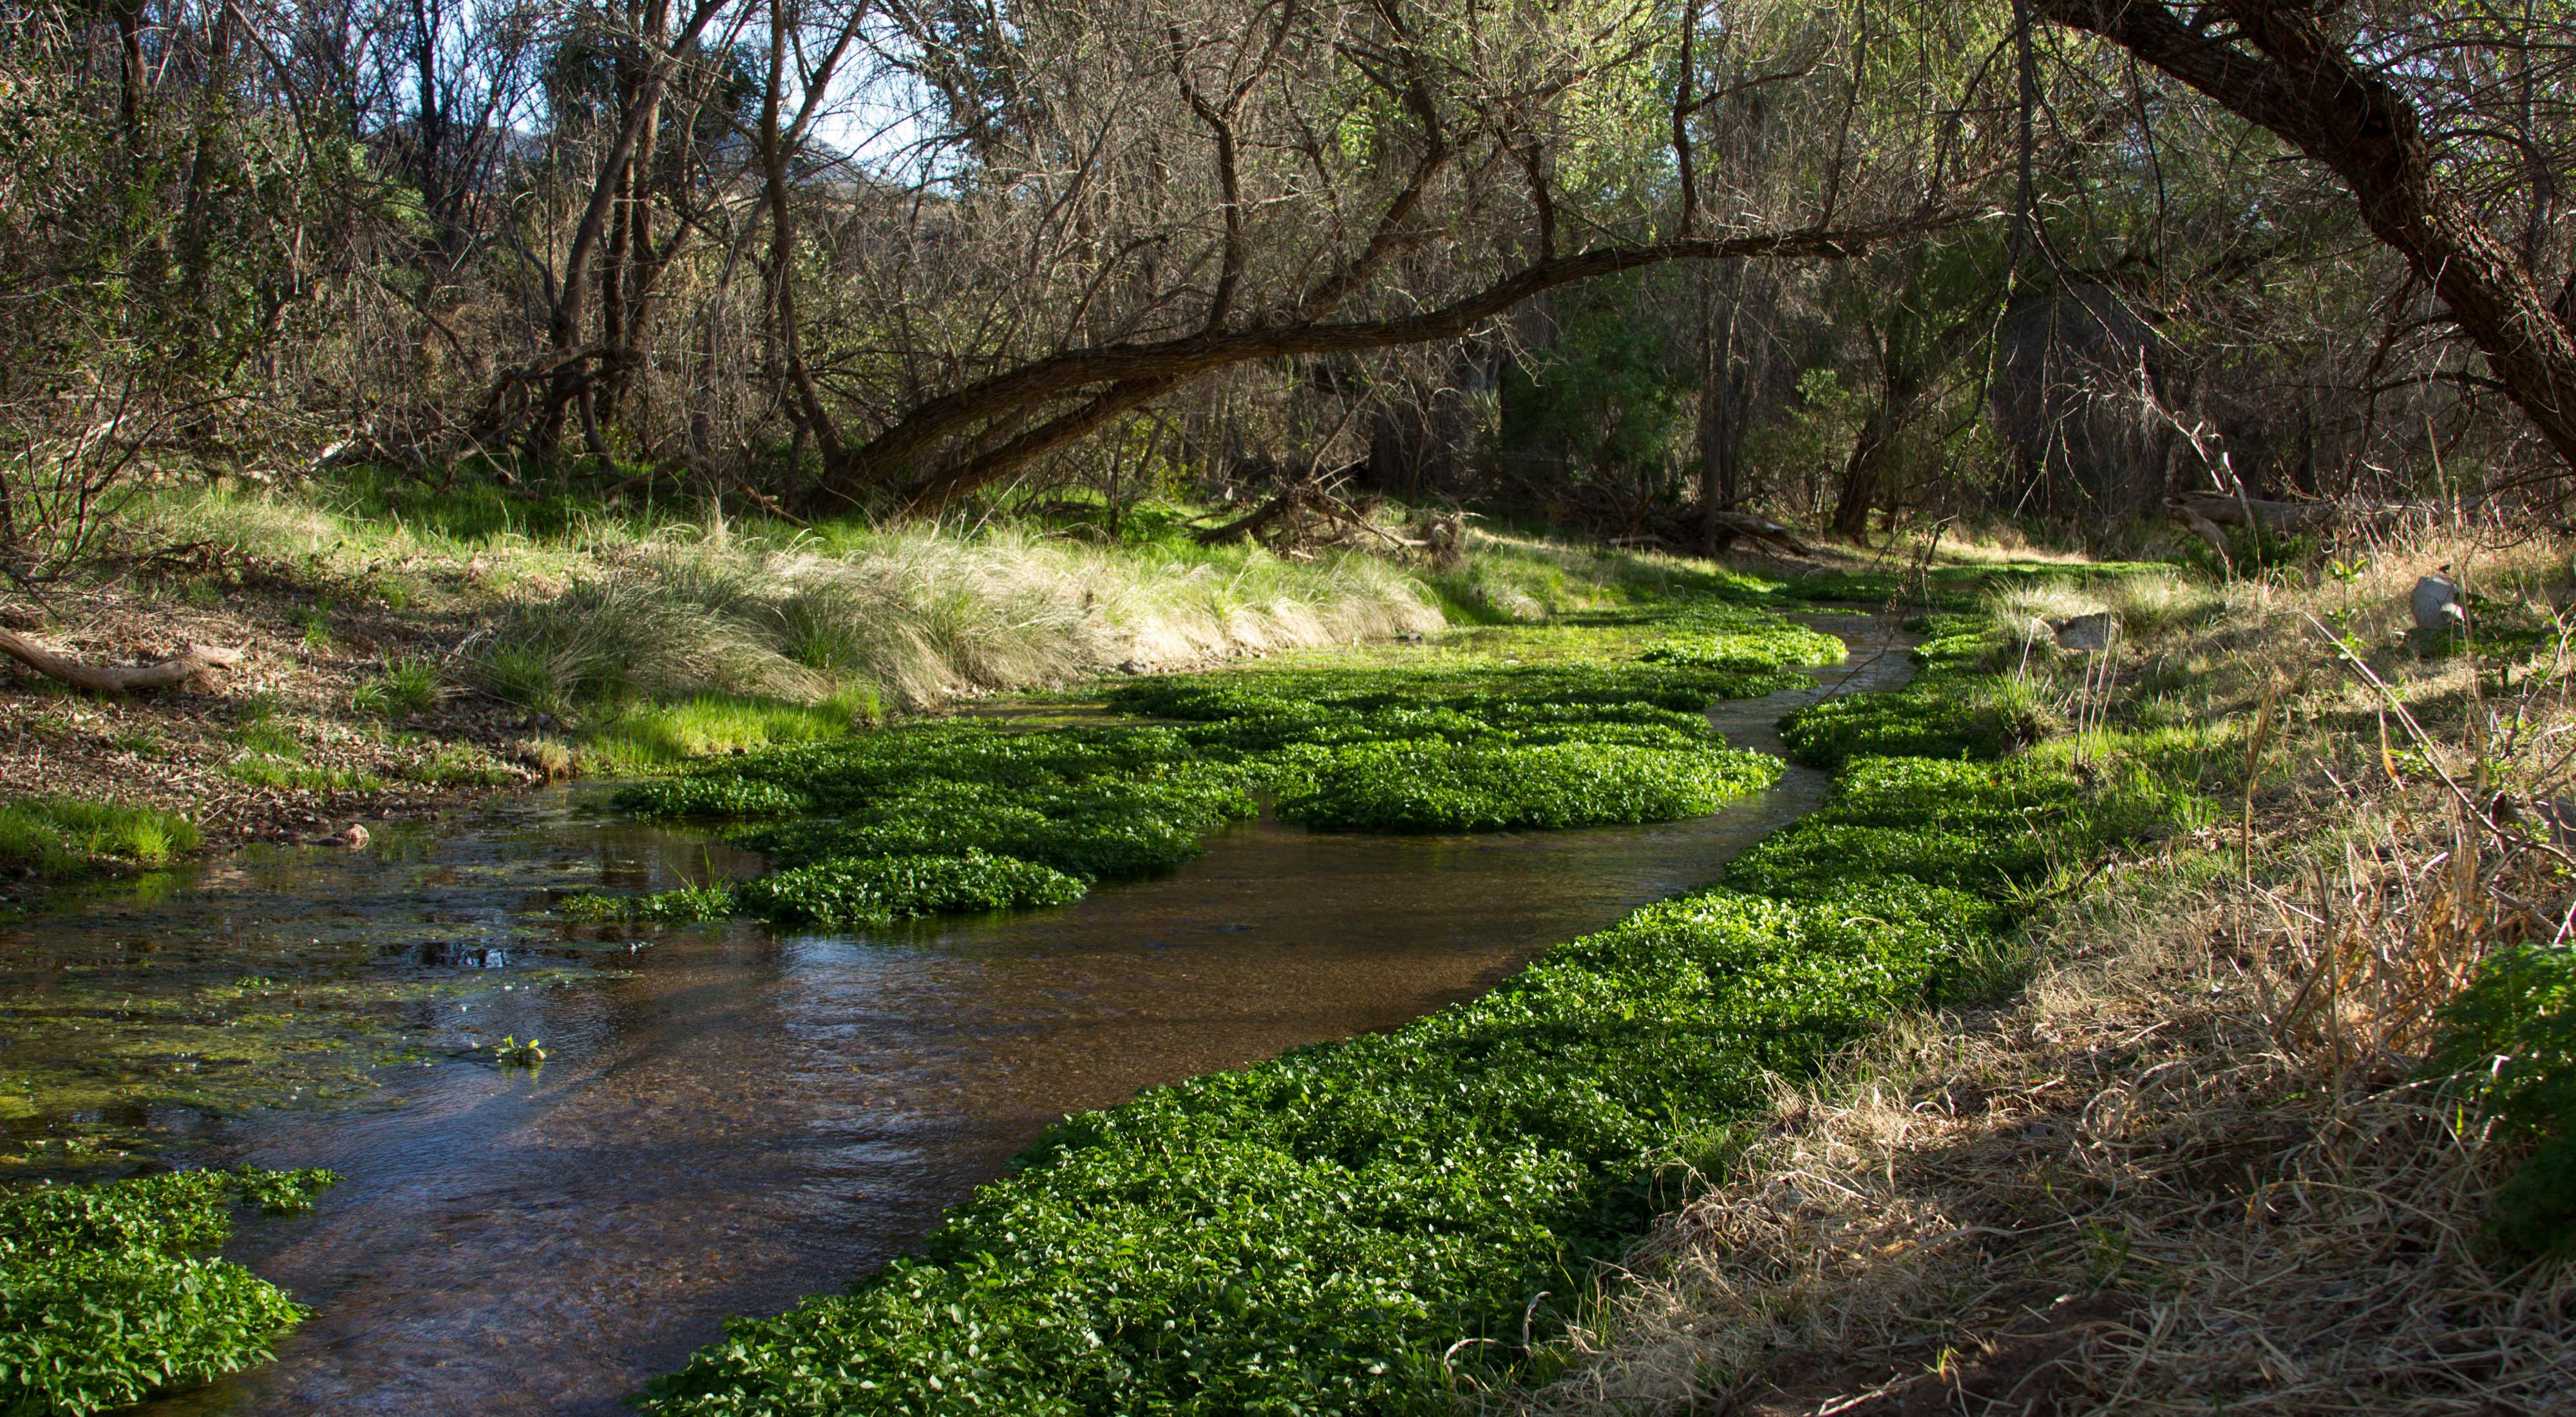 Creek running through wooded area, with trees arching over the water.